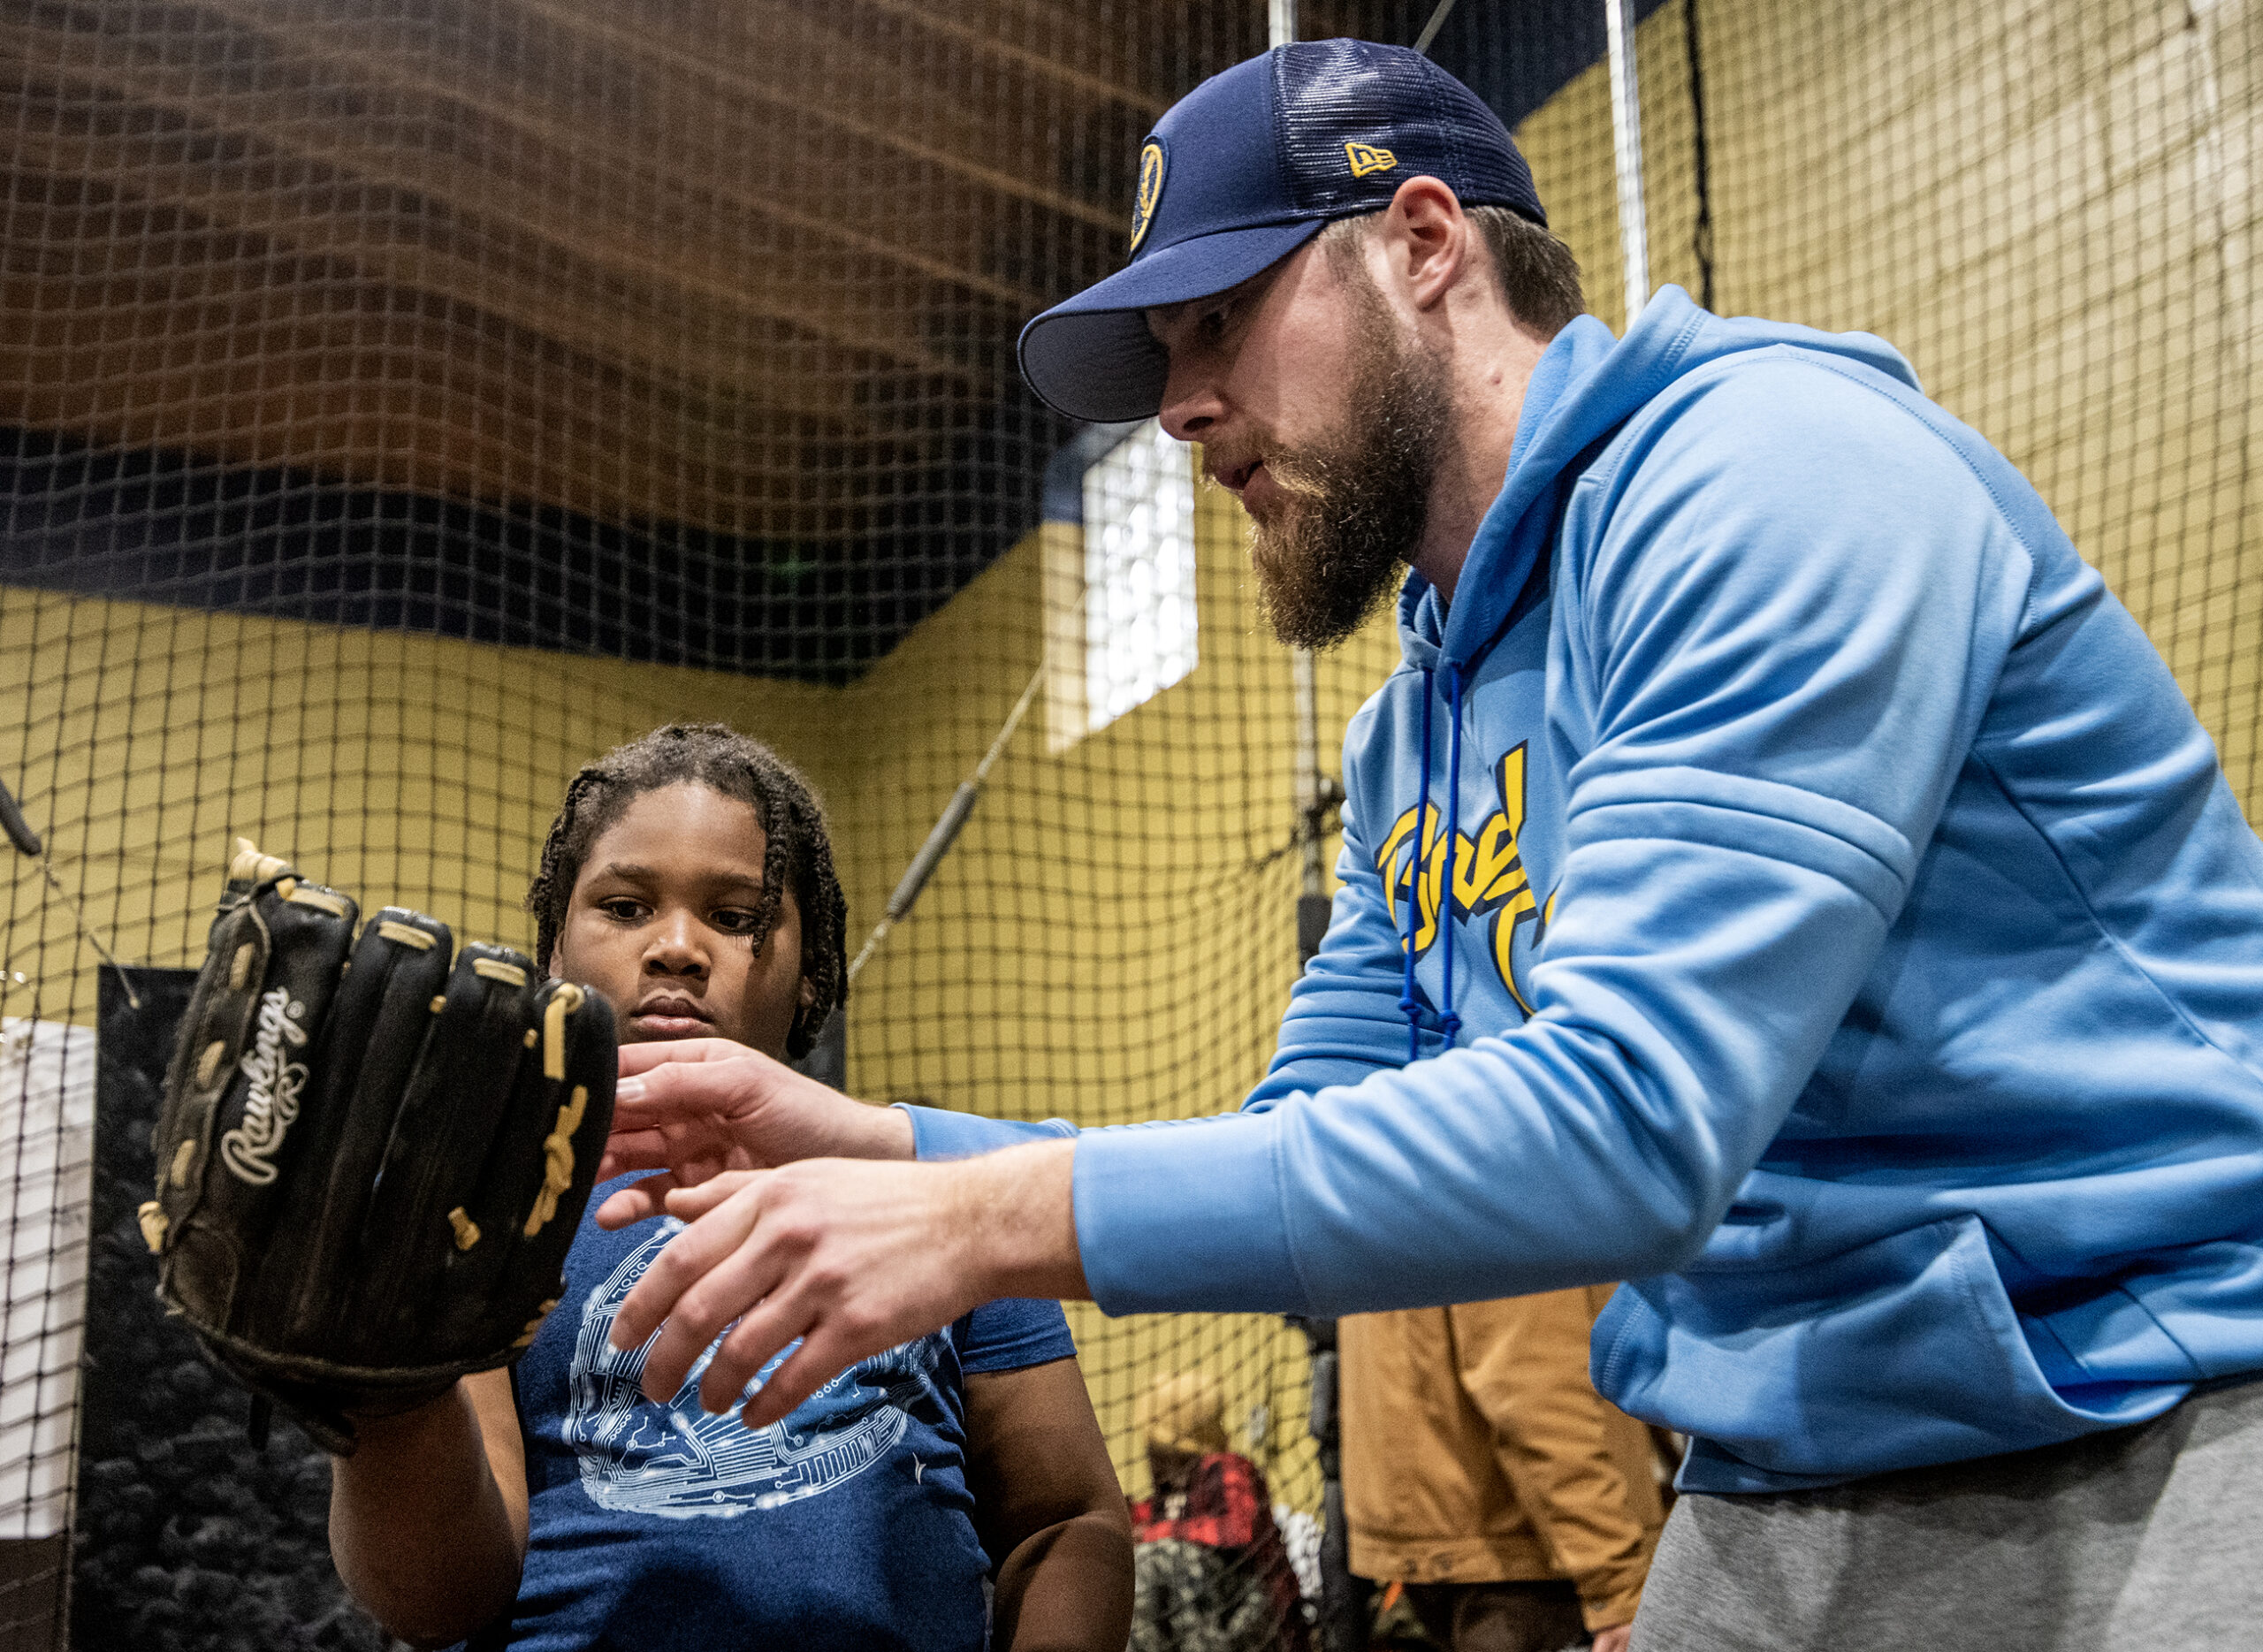 A child looks at their hand in a glove while a coach helps.